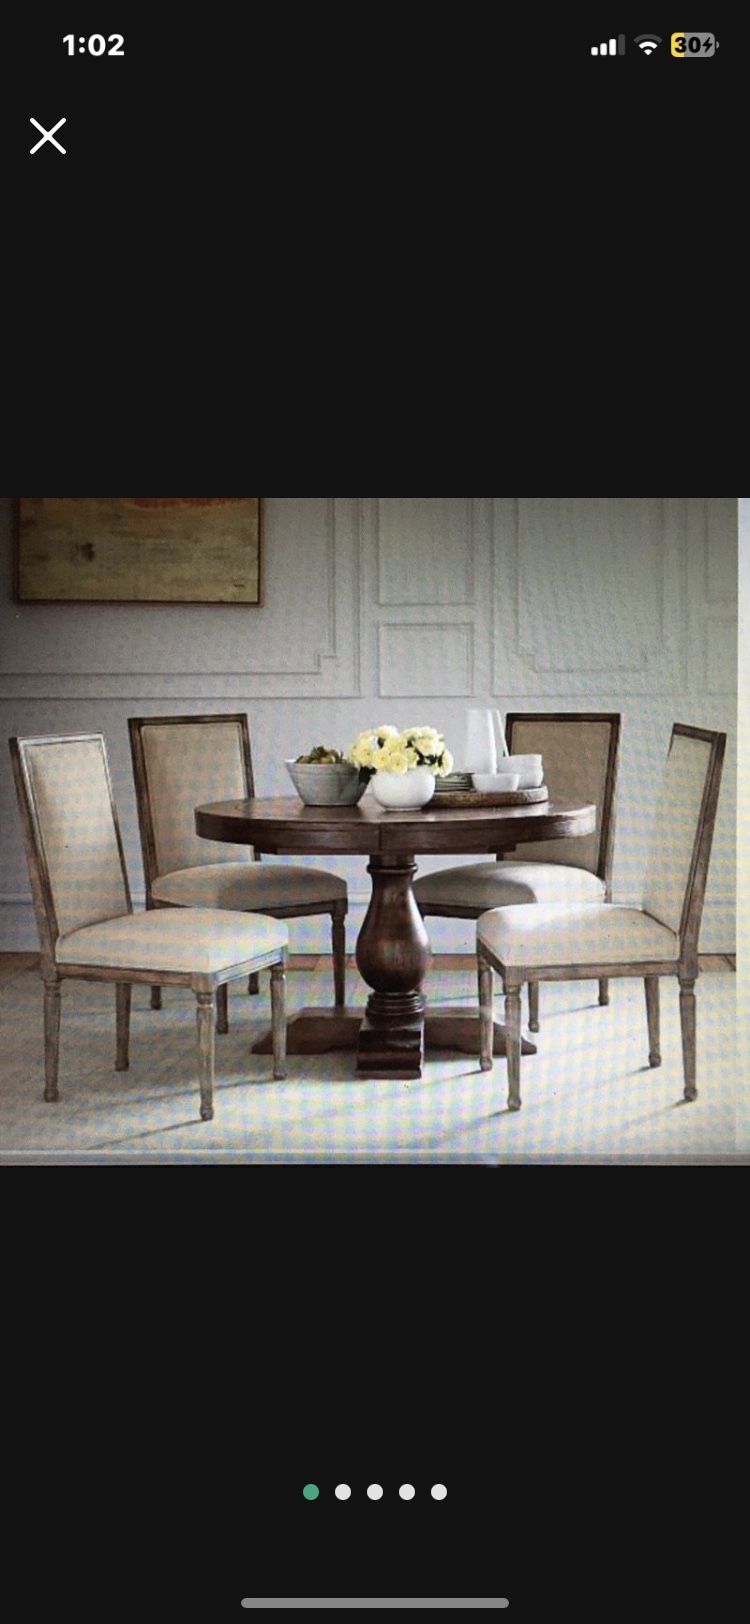 Pottery Barn Dining Table with Internal Built in Leaf for Sale. 